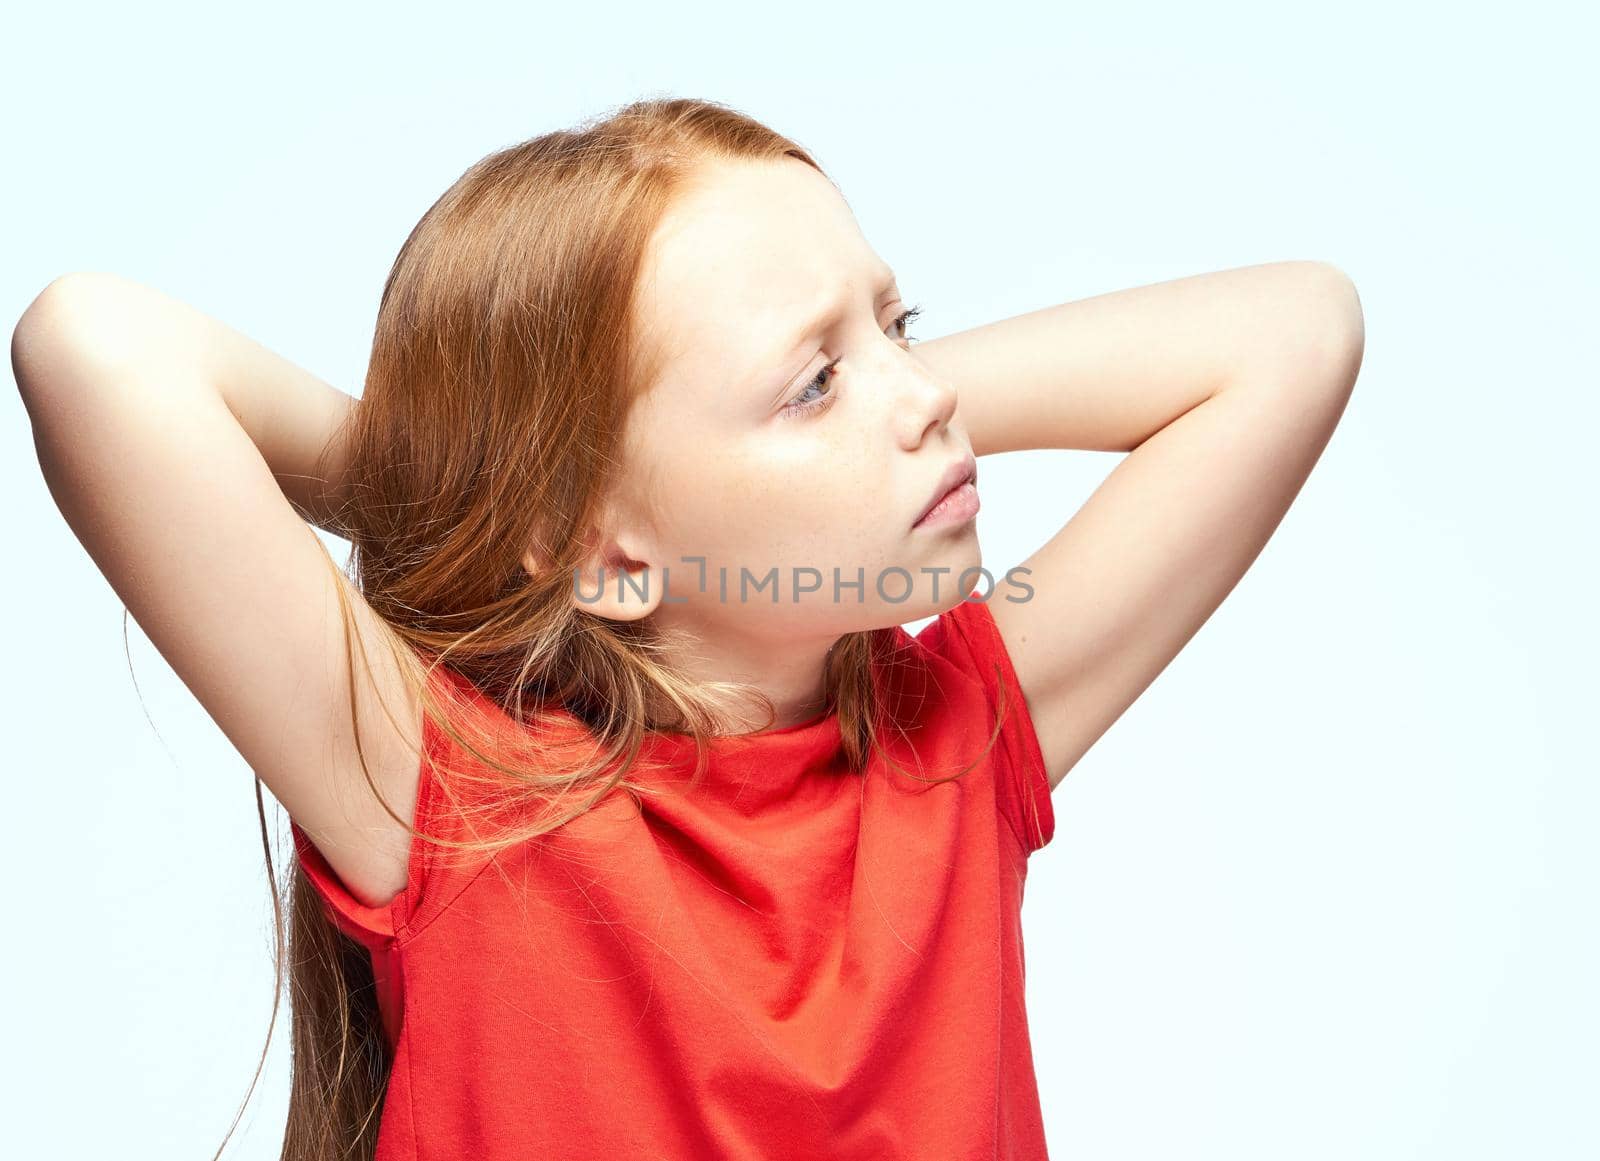 girl with red hair posing red t-shirt childhood. High quality photo